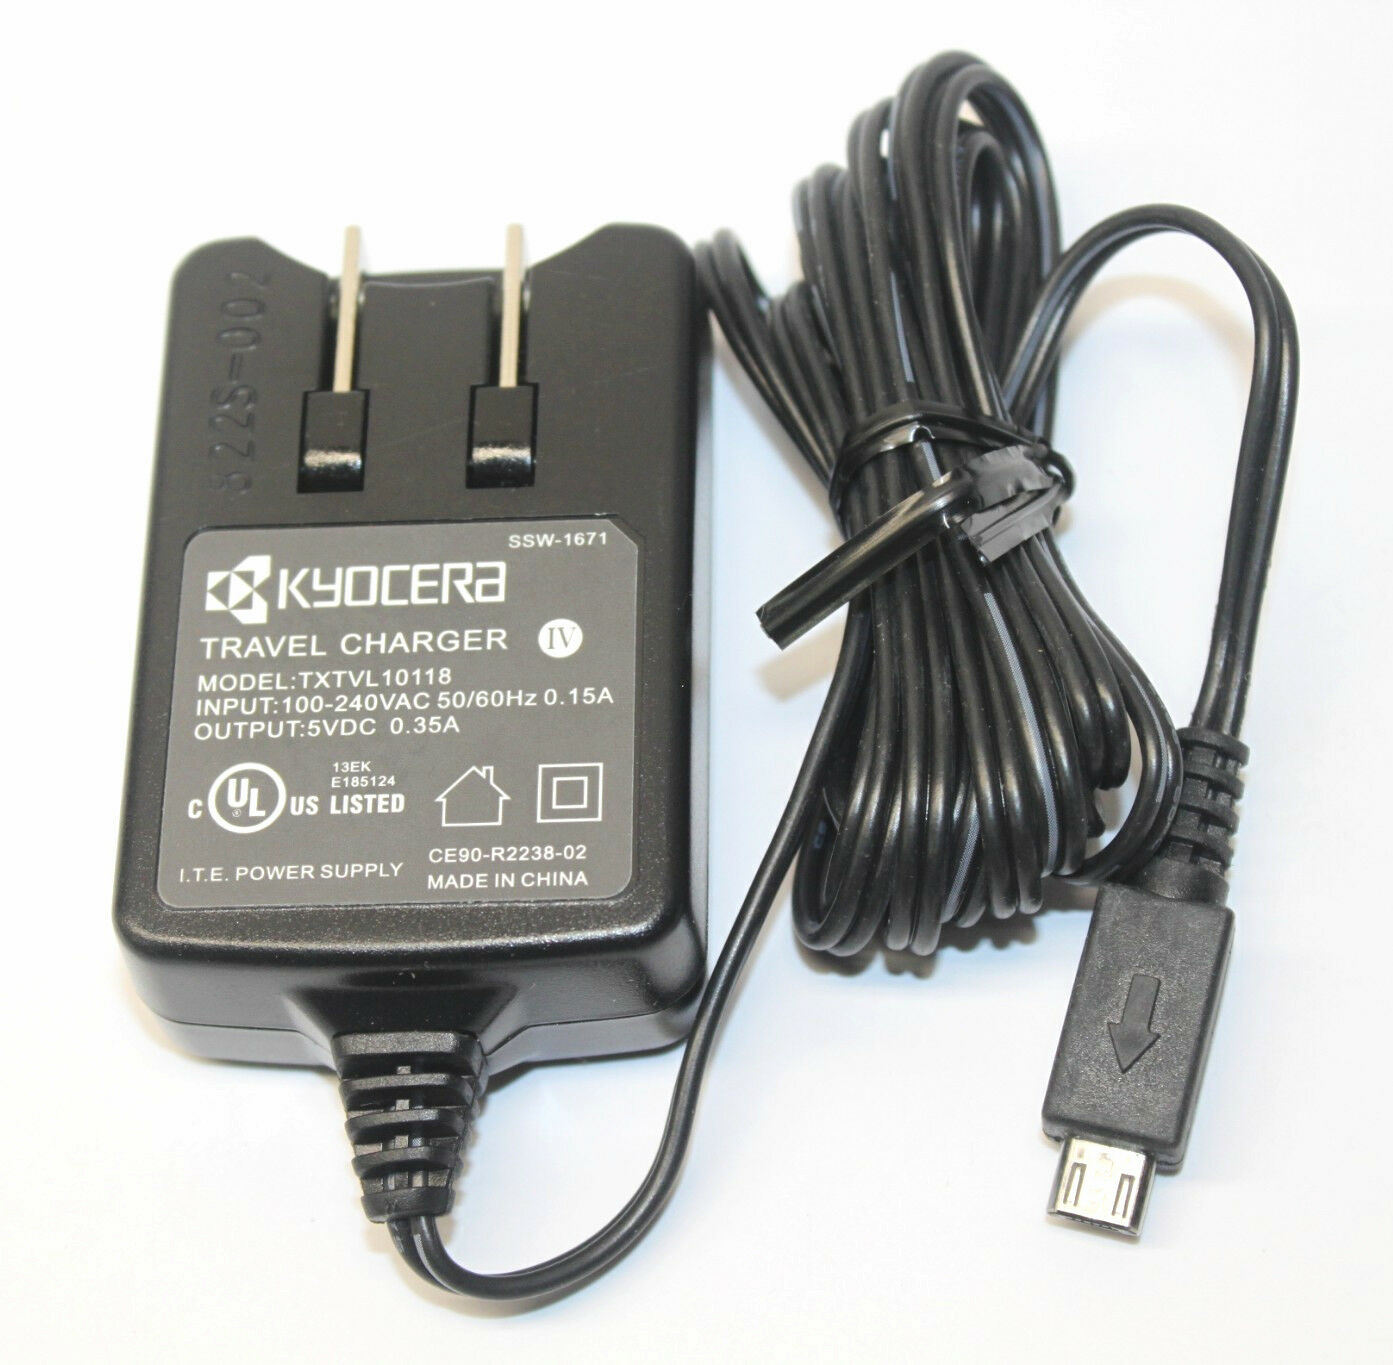 Kyocera TXTVL10118 ITE Power Supply Travel Charger AC Adapter Output DC 5V 0.35A Brand: Kyocera Type: Adapter MPN